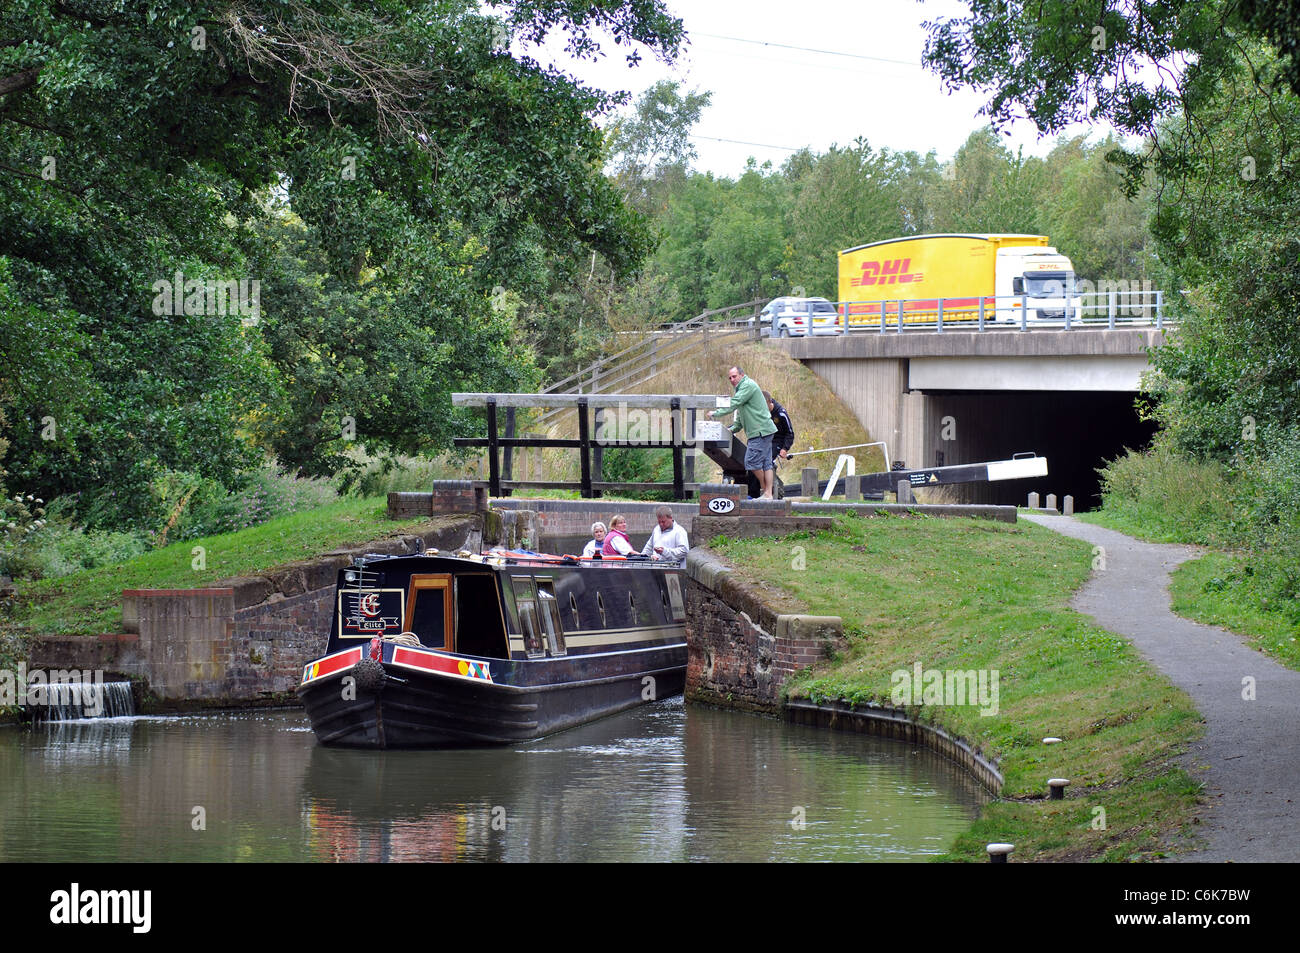 Narrowboat on the Stratford Canal with a DHL lorry on the M40 motorway behind, Warwickshire, UK Stock Photo